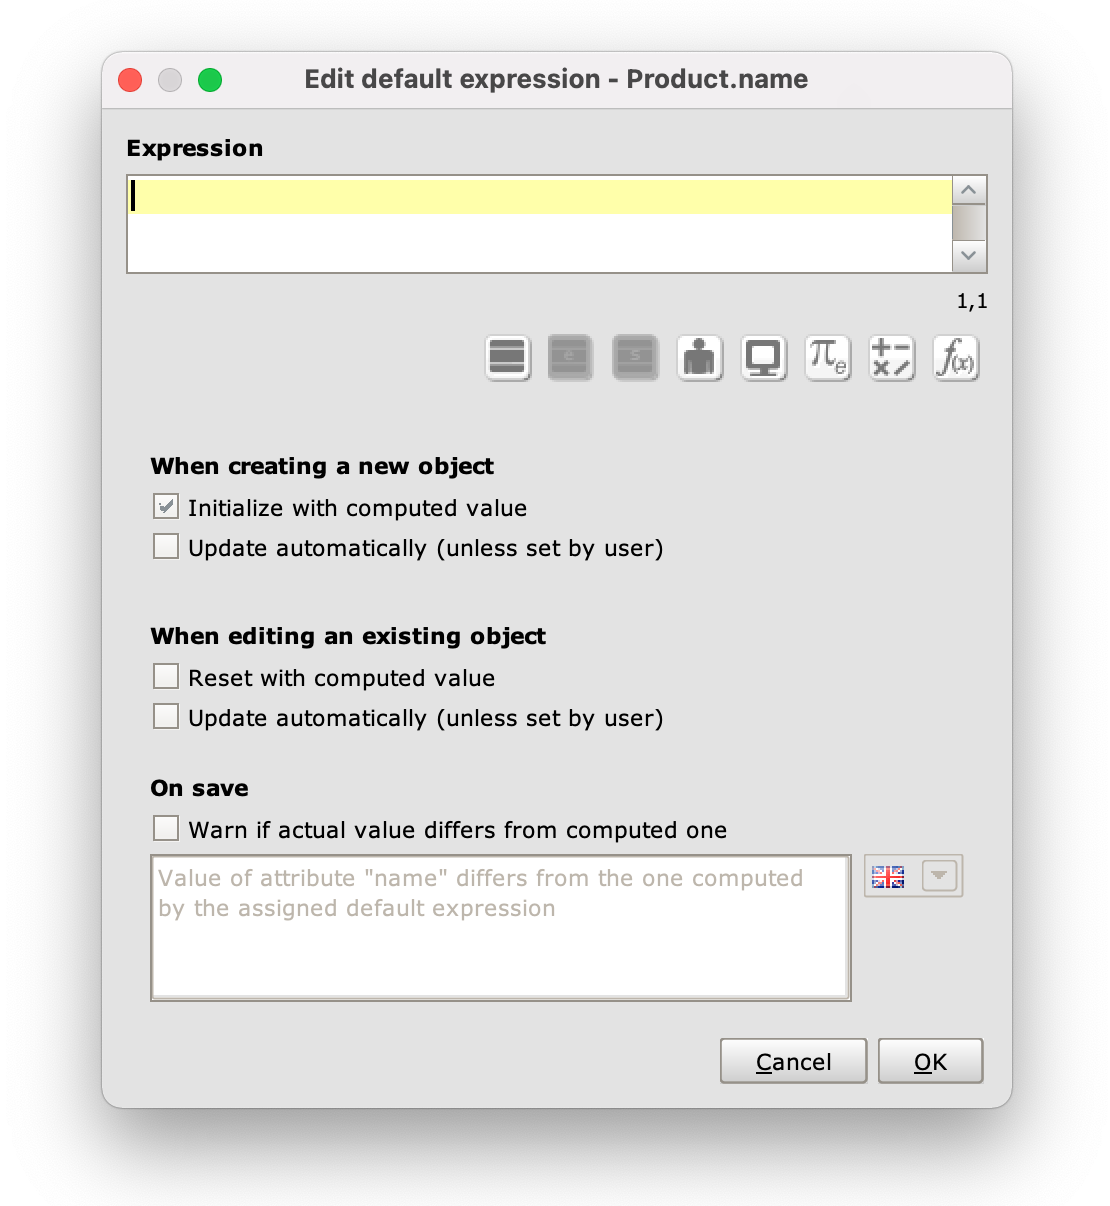 Using an expression to set a default value